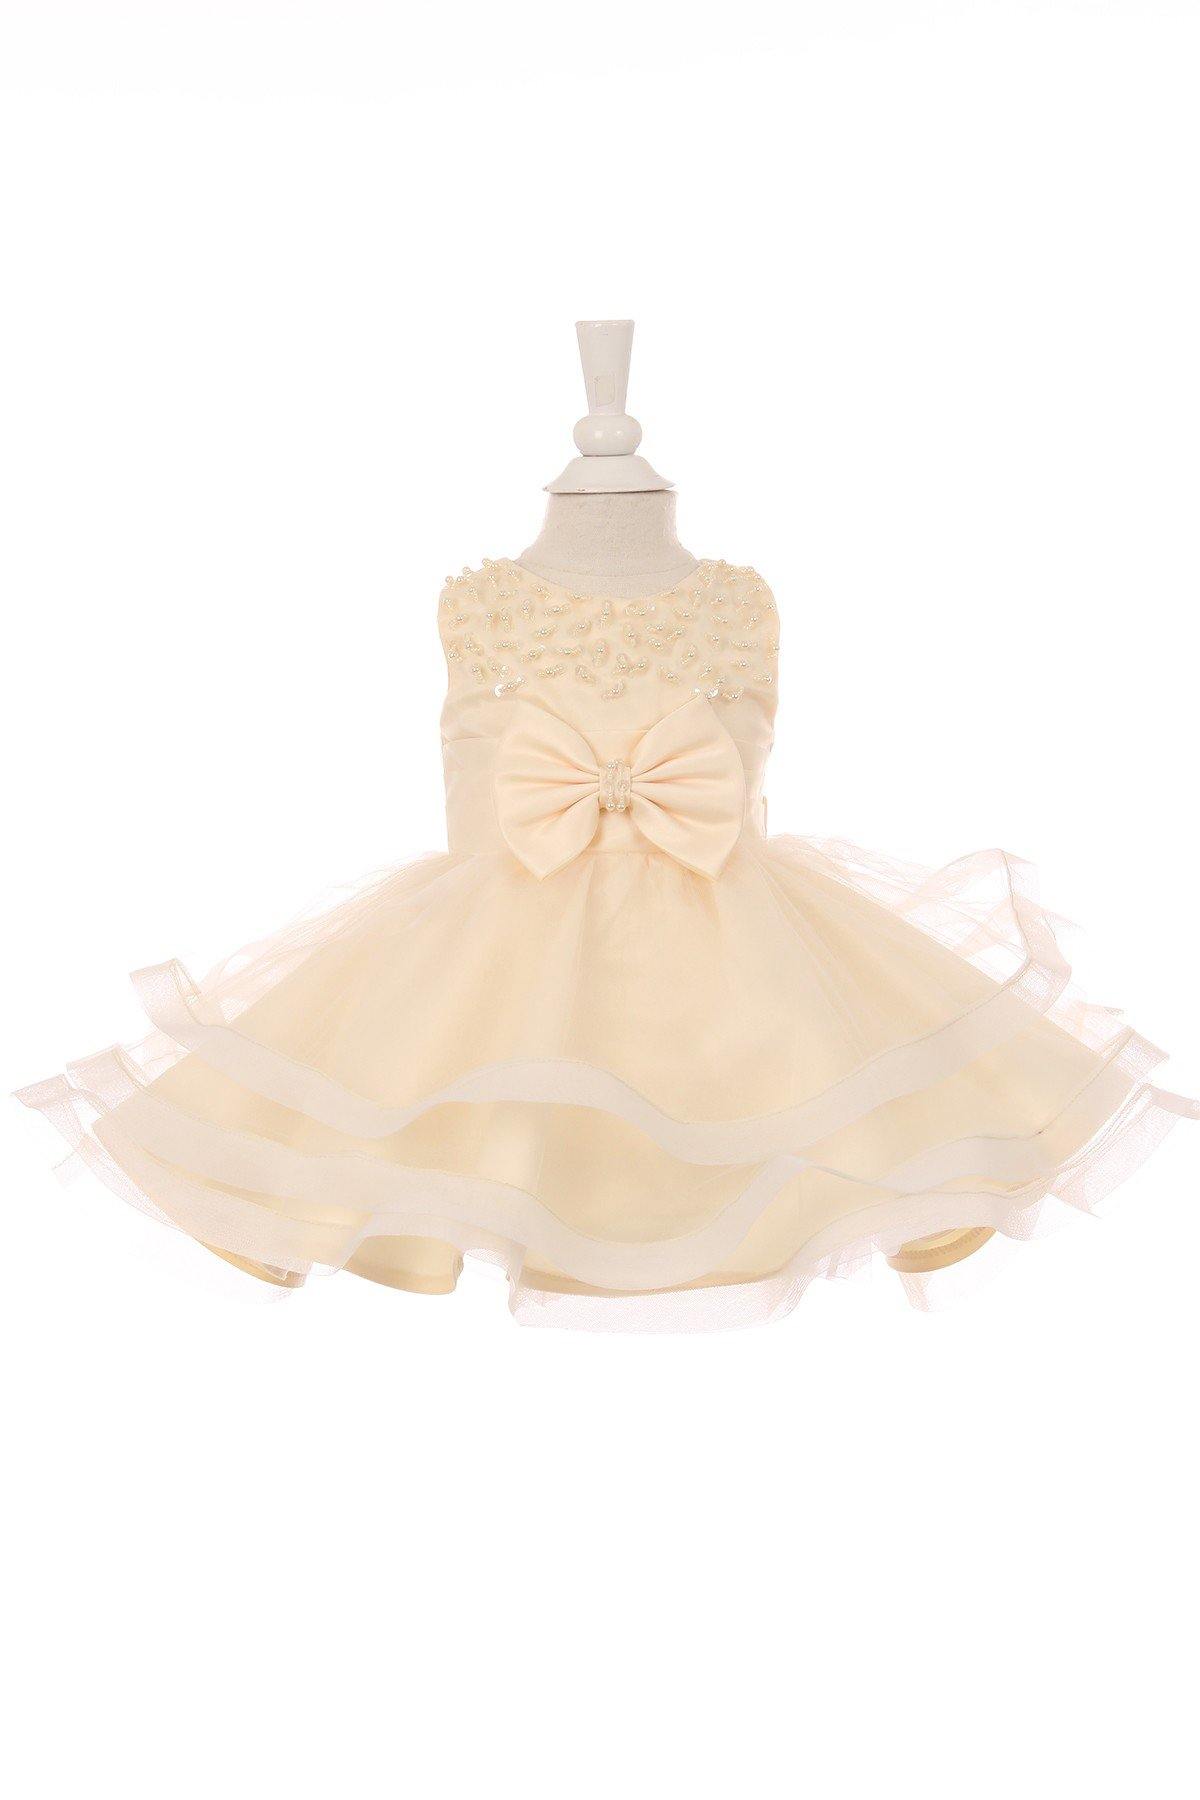 Sleeveless Flower Girls Dress Embroidered Bodice - The Dress Outlet Cinderella Couture